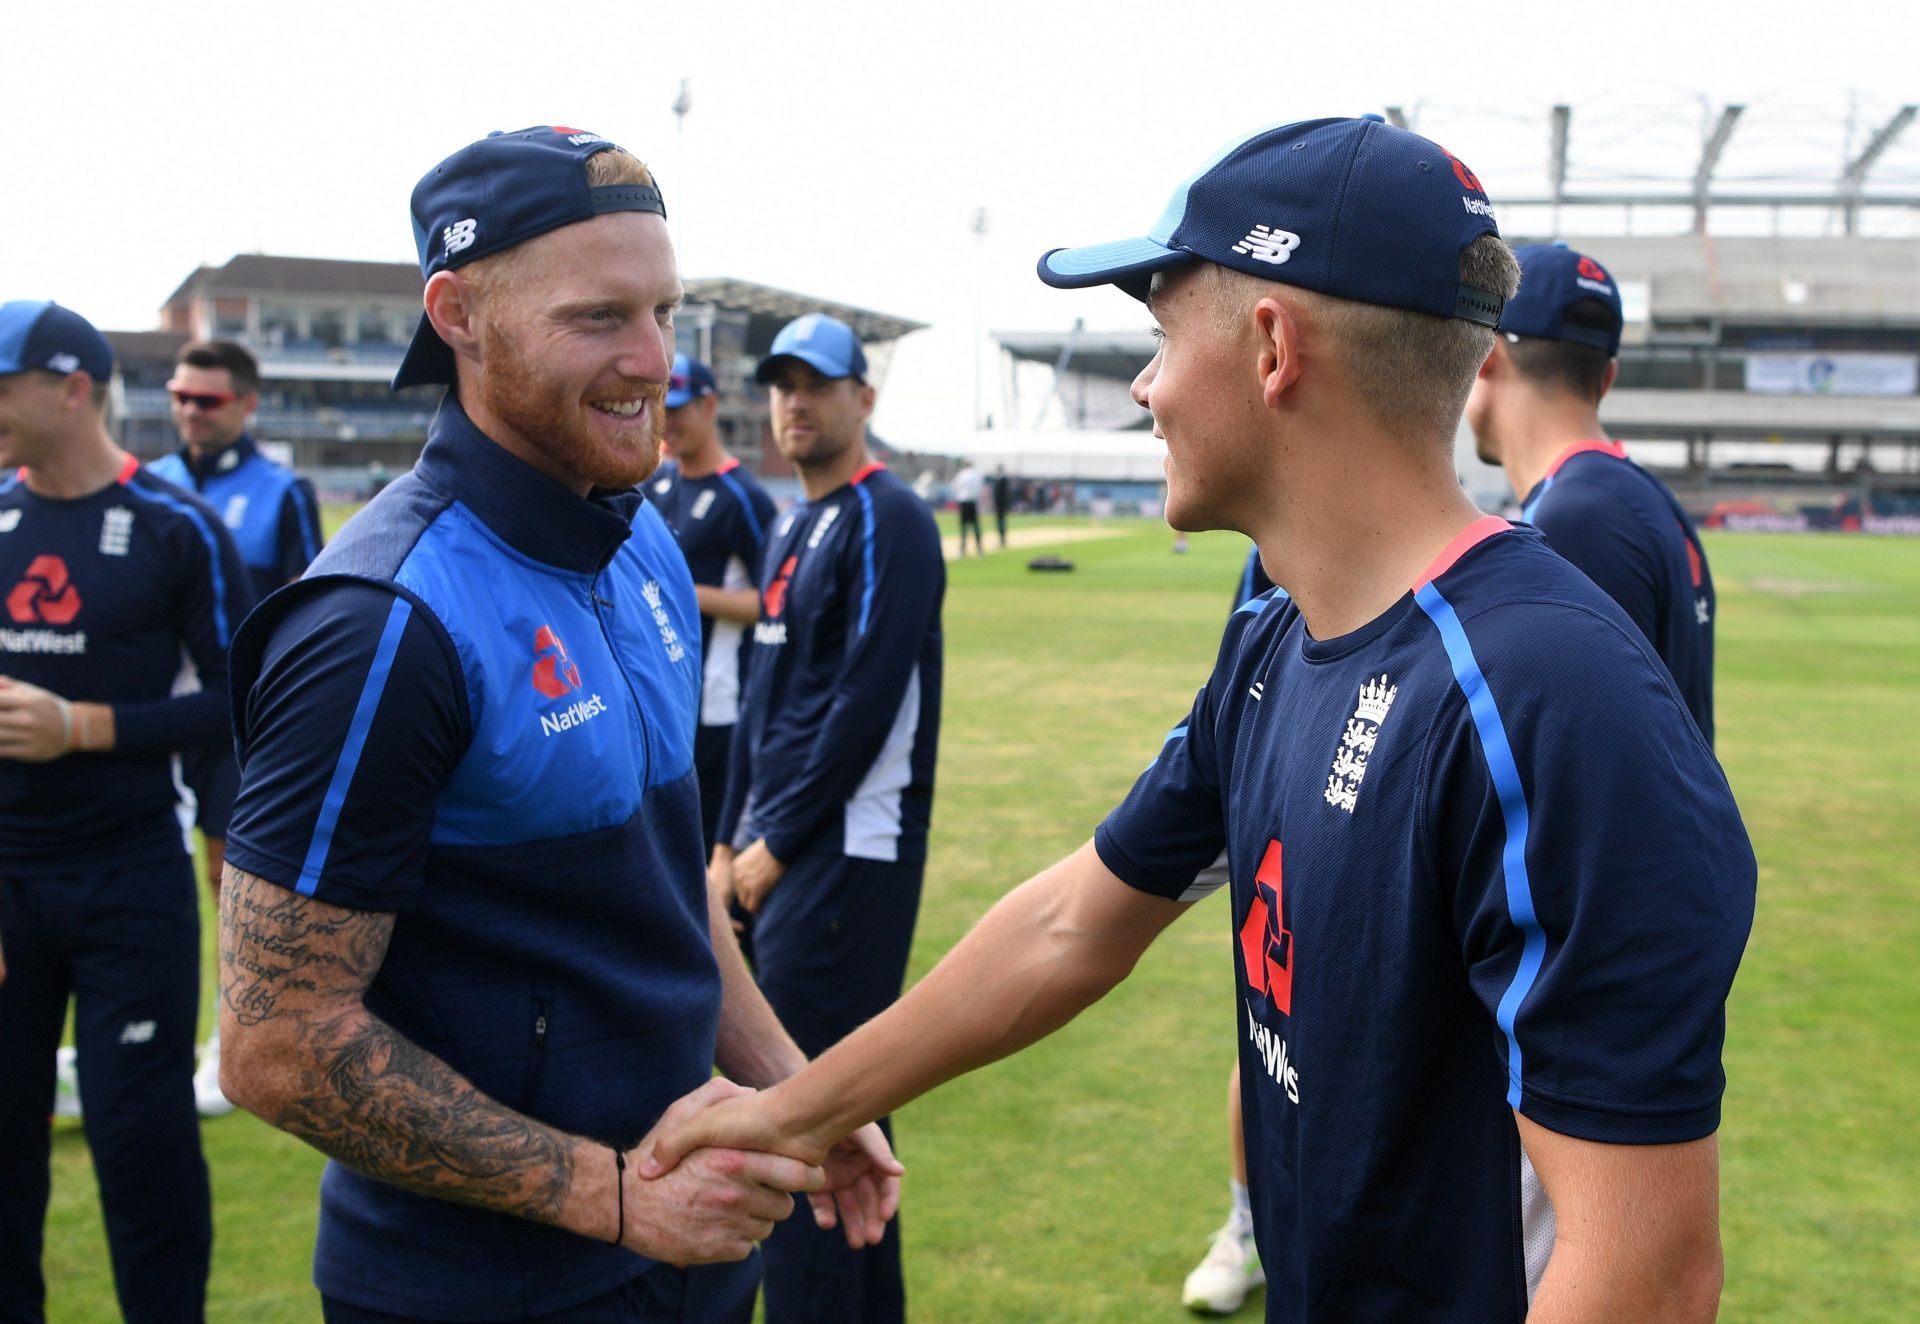 Ben Stokes and Sam Curran could be hot property at the IPL 2023 auction.